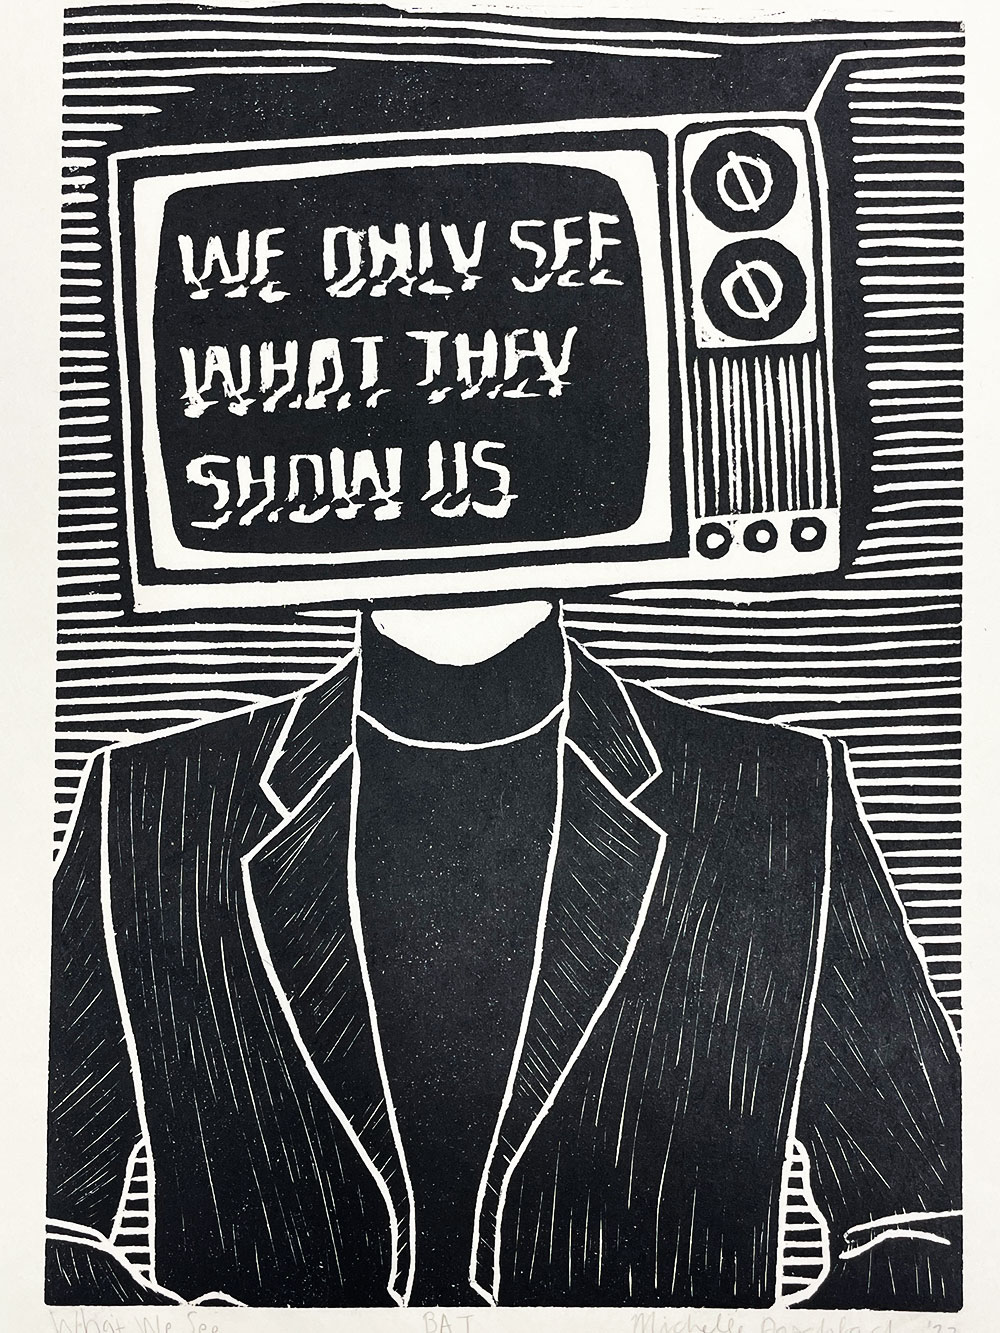 A printed image of person with the head of an old television with the words "We only see what they show us" written across the screen.